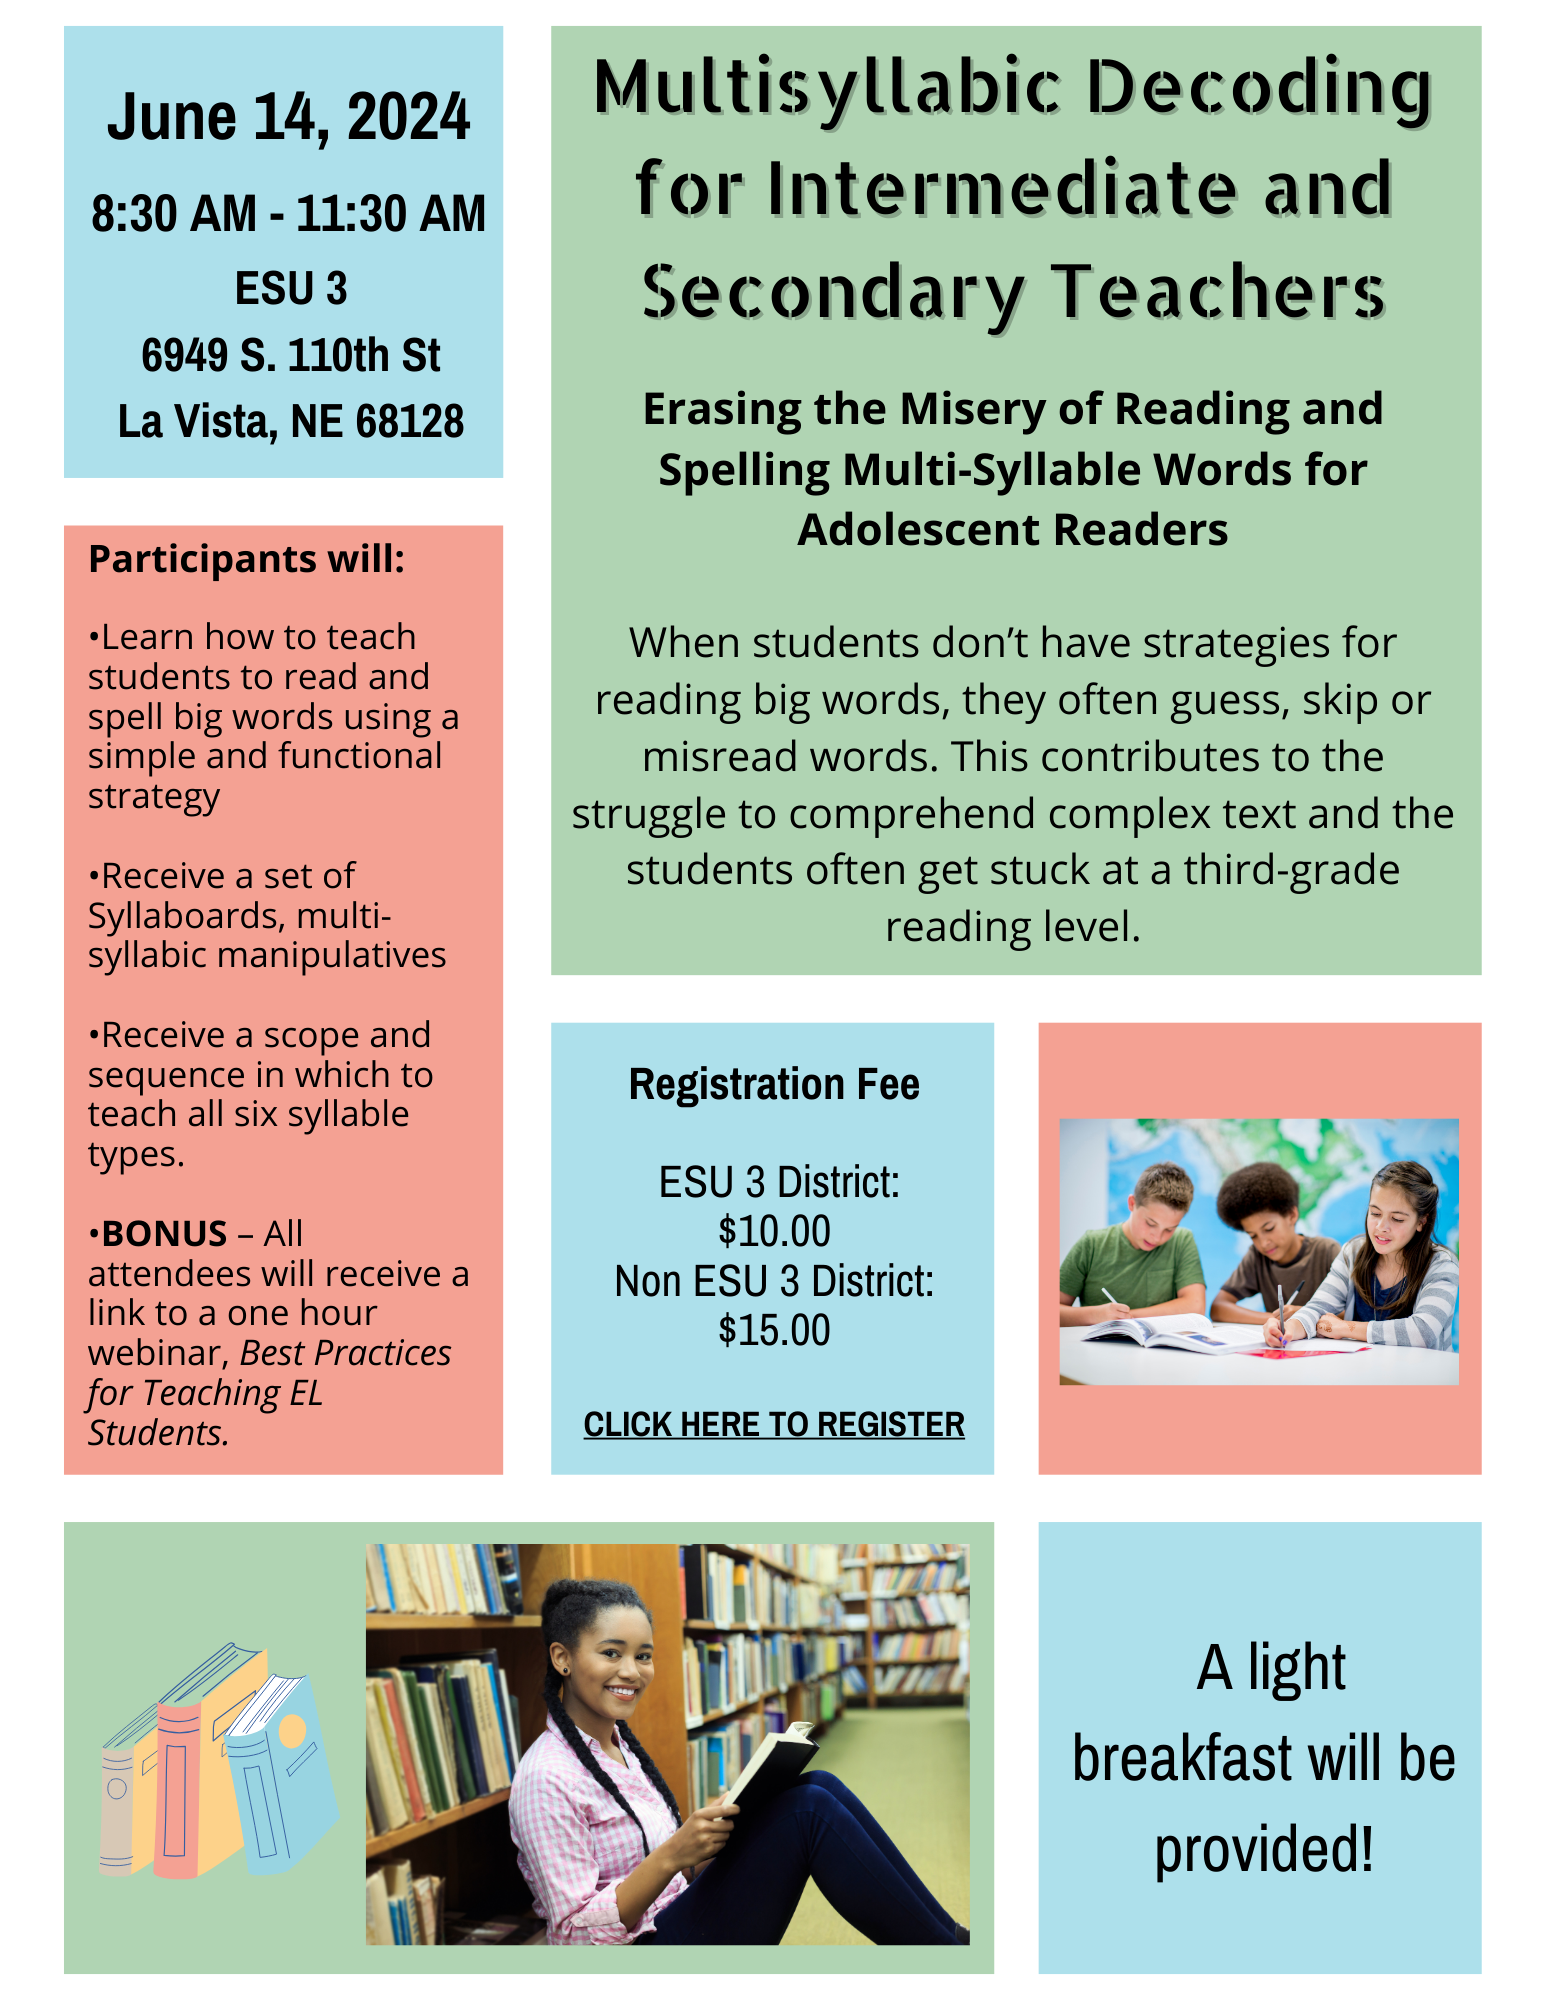 Click here to register for Multisyllabic Decoding, 6-14-24, #23003